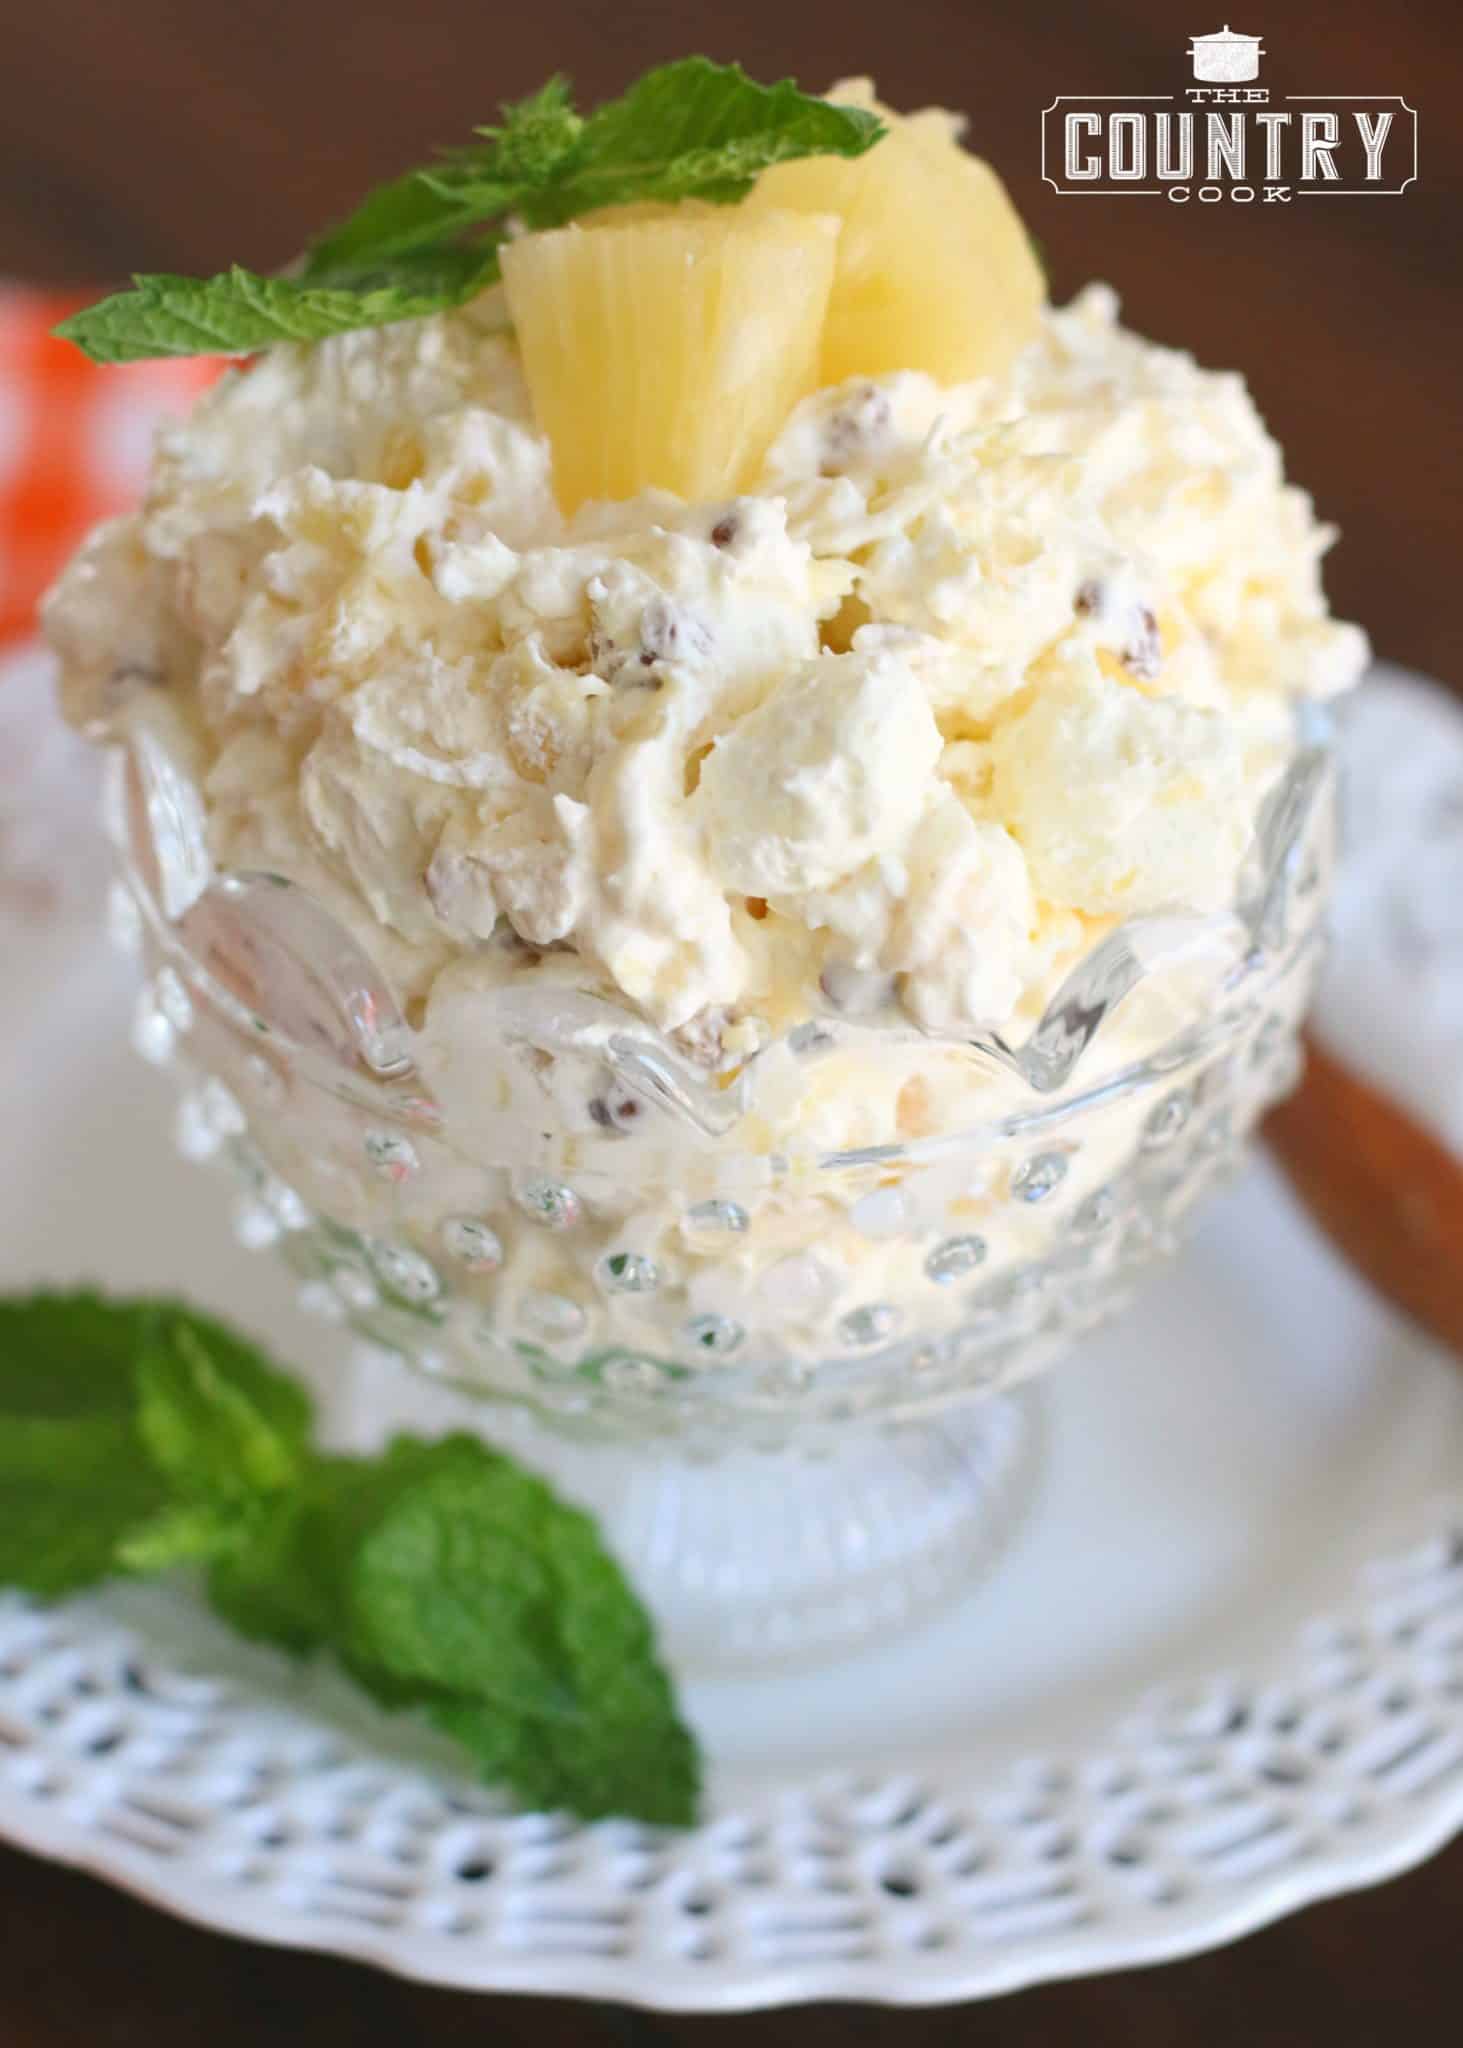 Pineapple Fluff shown served in a small, clear dessert bowl.